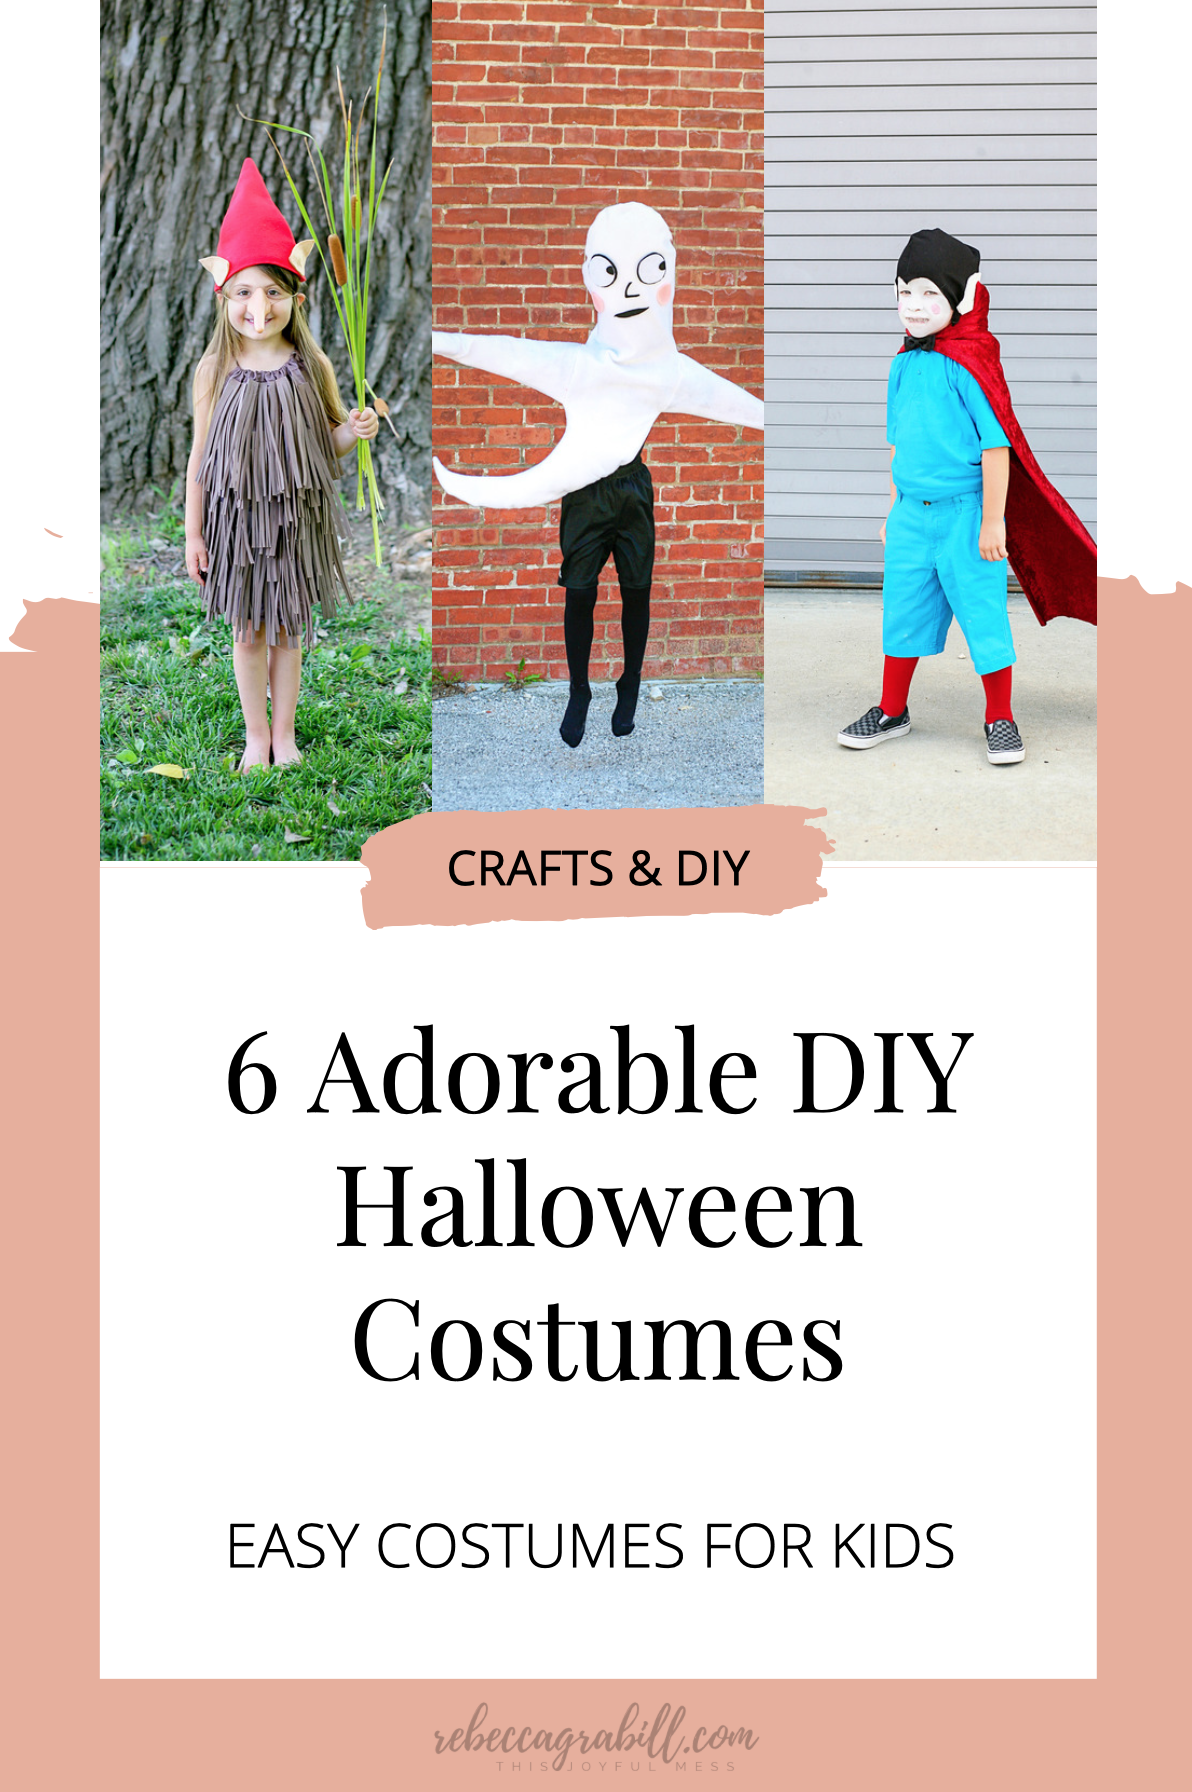 6 Adorable and Easy DIY Halloween Costumes for Kids — Rebecca Grabill